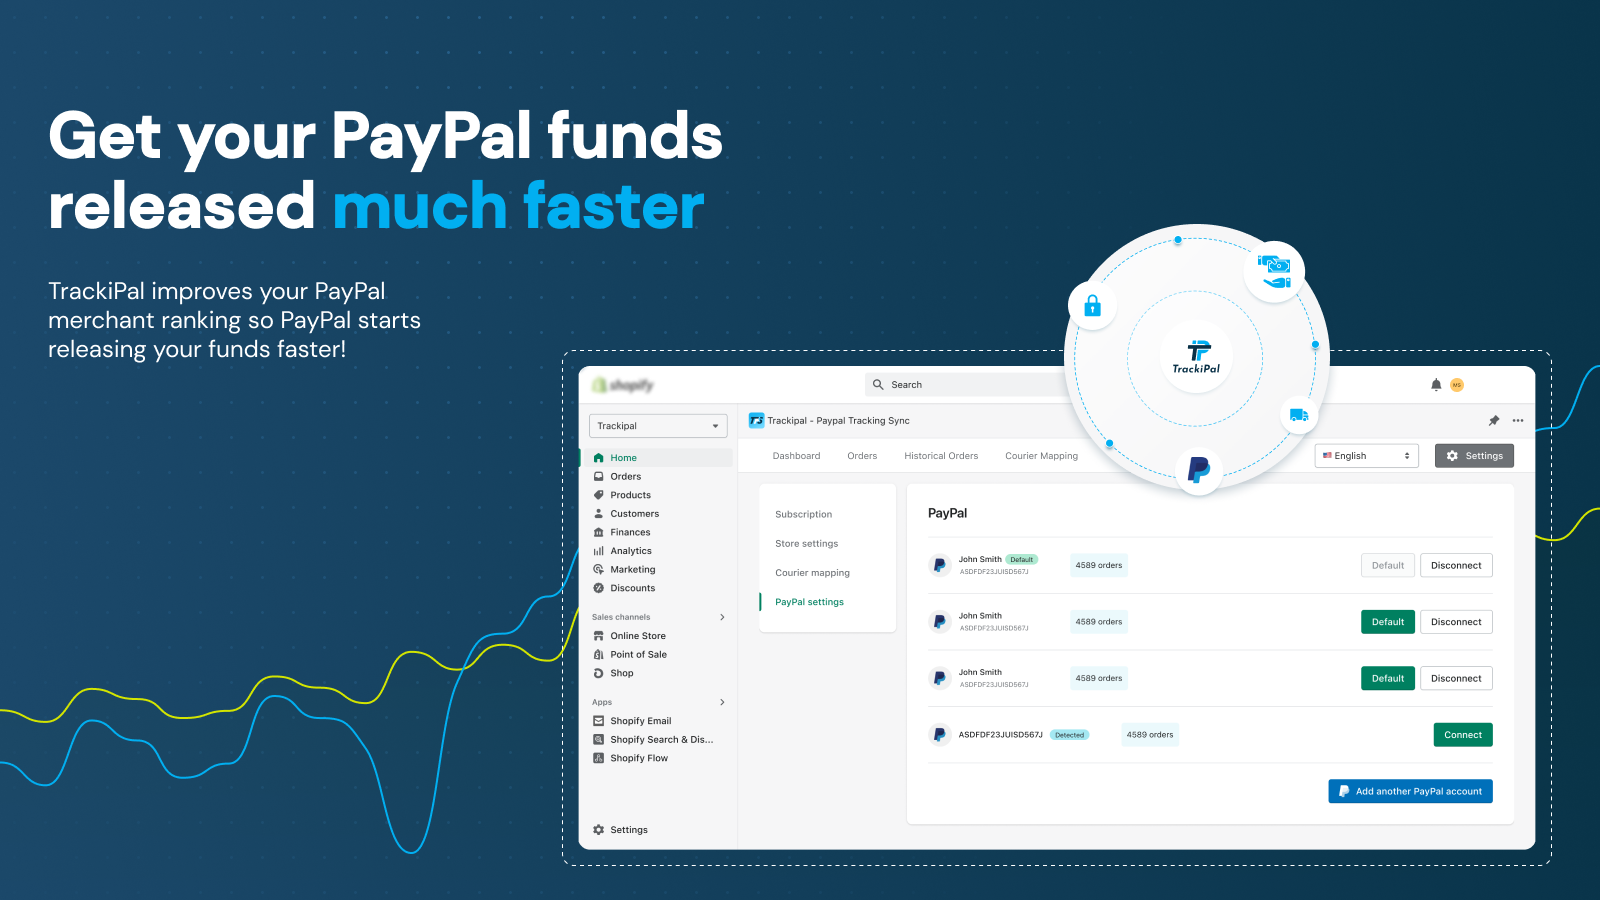 With TrackiPal PayPal Tracking Sync you get your funds faster!